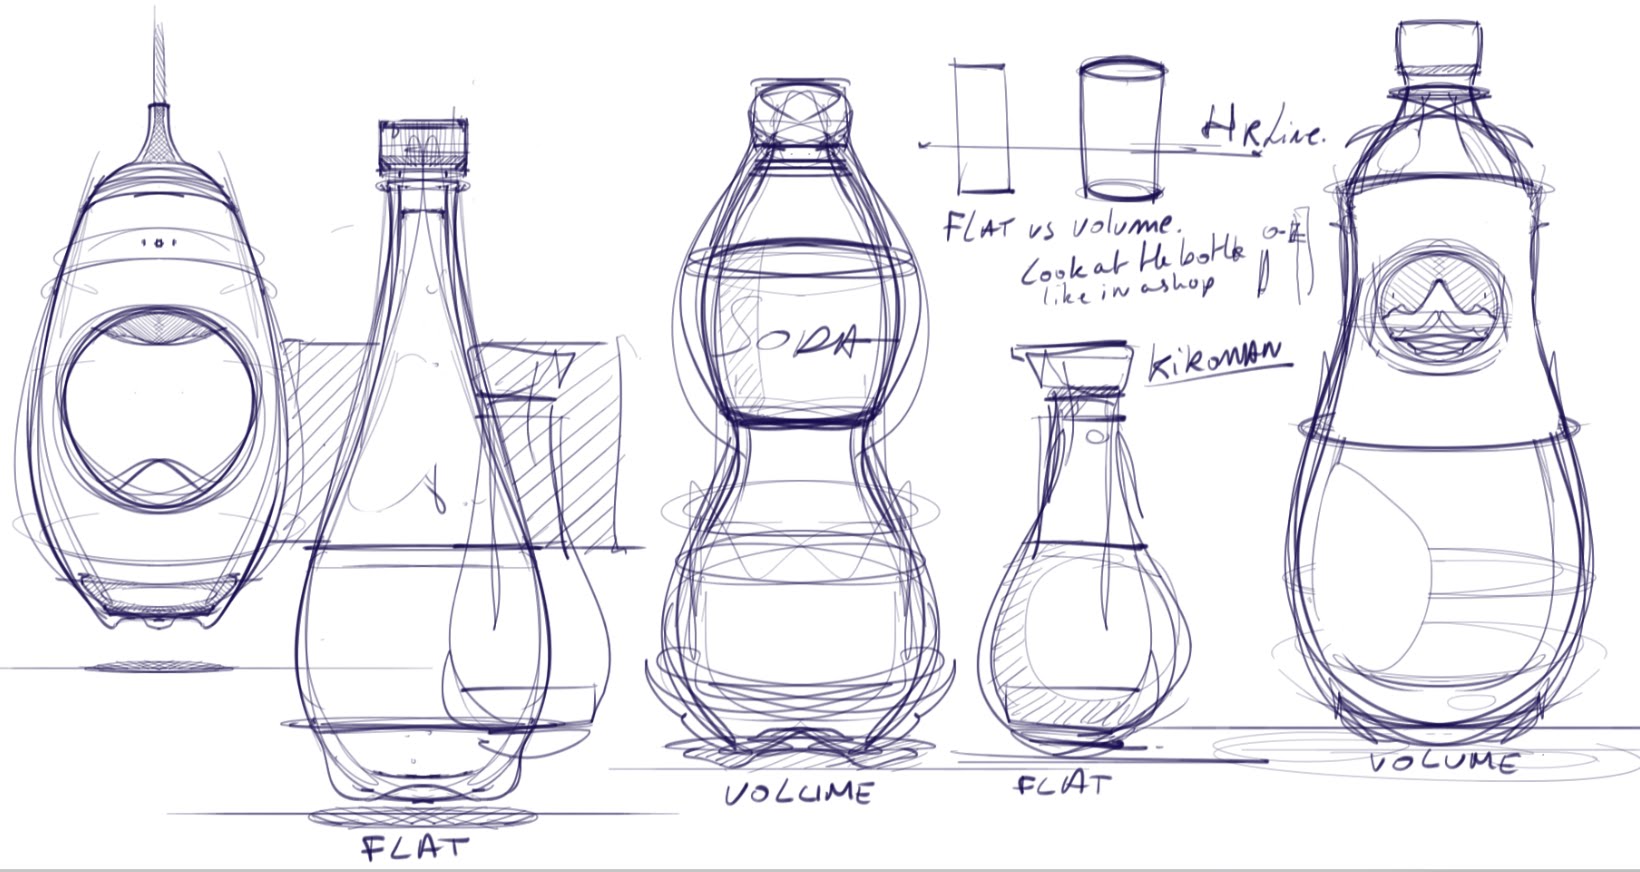 Product Design Sketches at Explore collection of